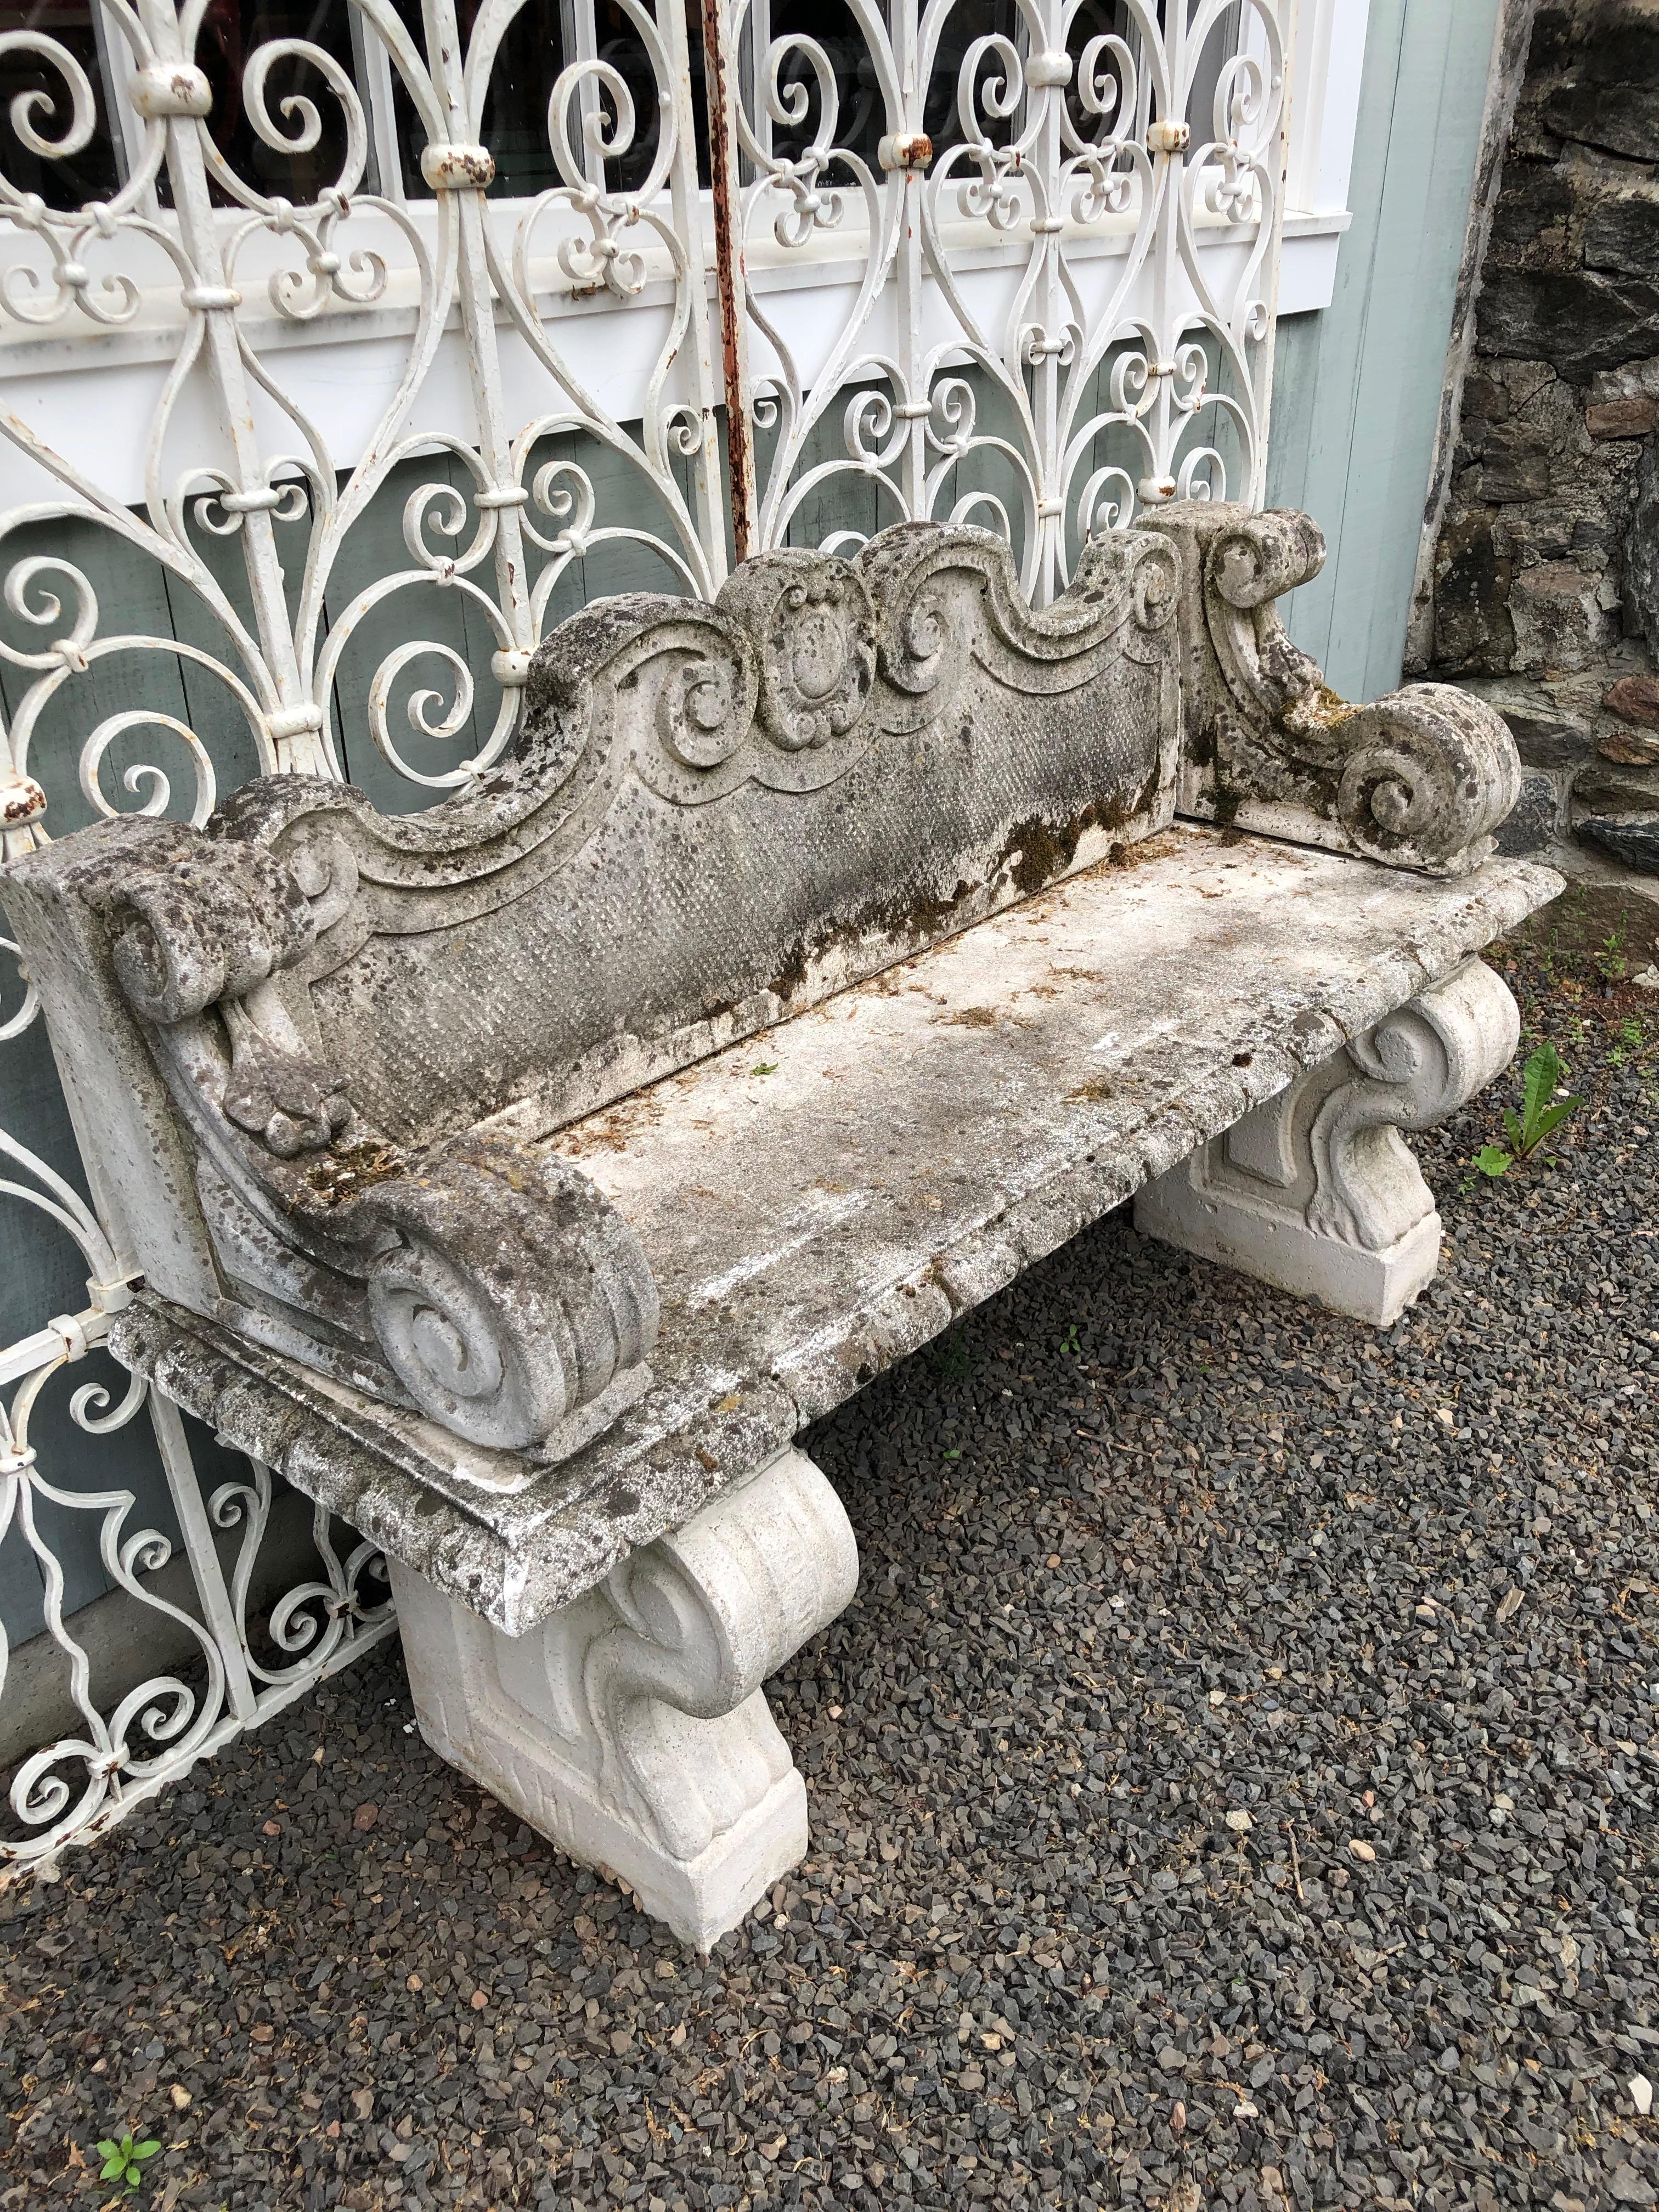 It’s rare we buy Rococo pieces, but this one was too pretty to resist. Made of cast marble, and with a beautiful weathered and mossy patina, it comes in six pieces for easy transport. Once sited, you will need to mortar the arms and back in place.